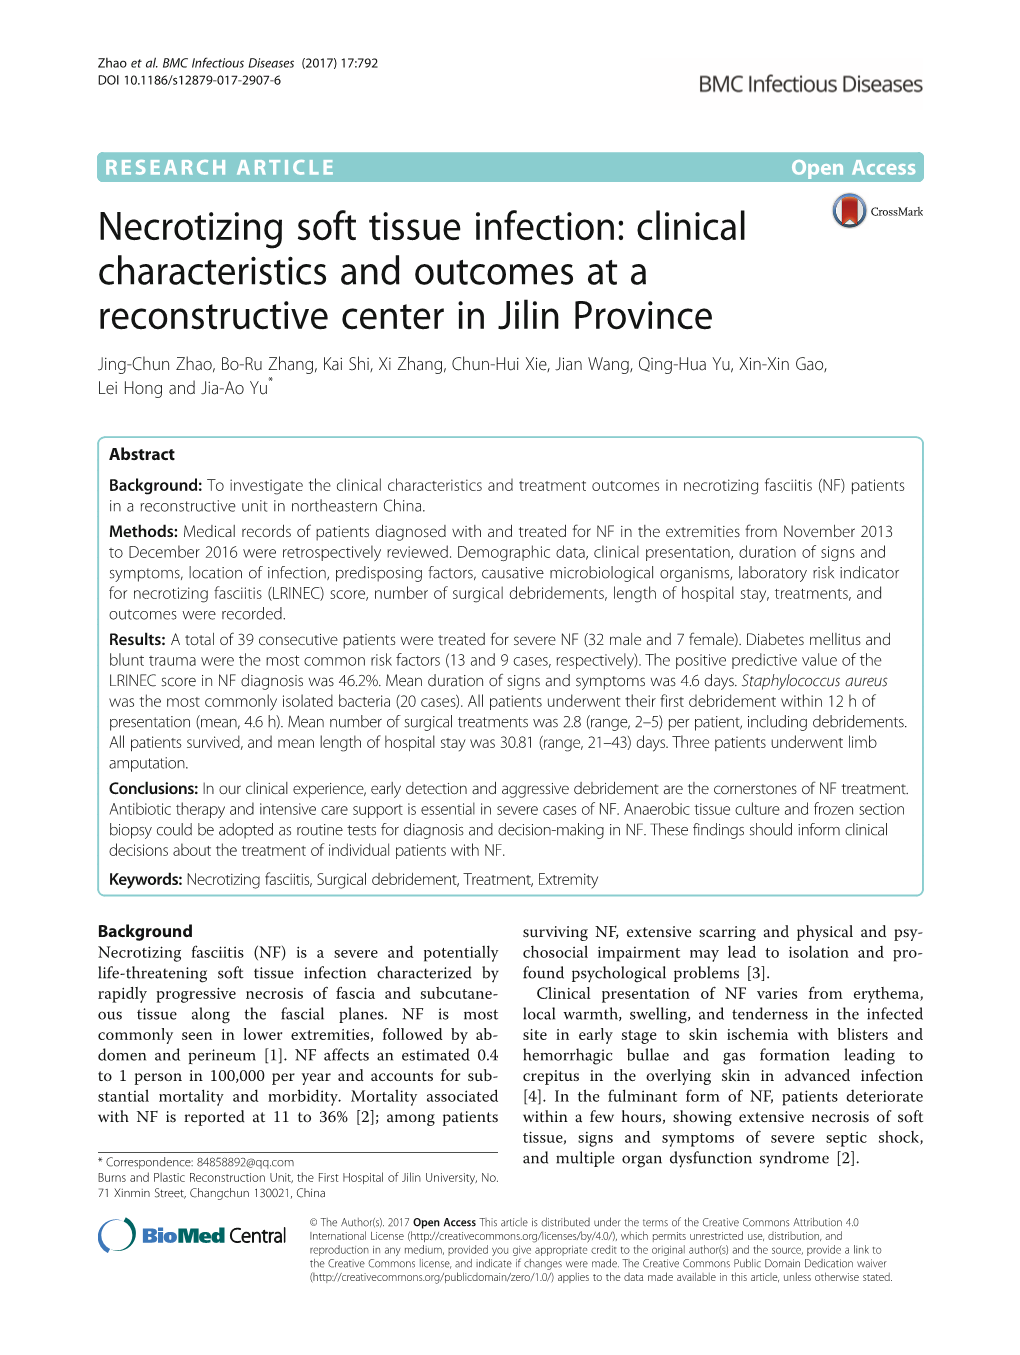 Necrotizing Soft Tissue Infection: Clinical Characteristics And